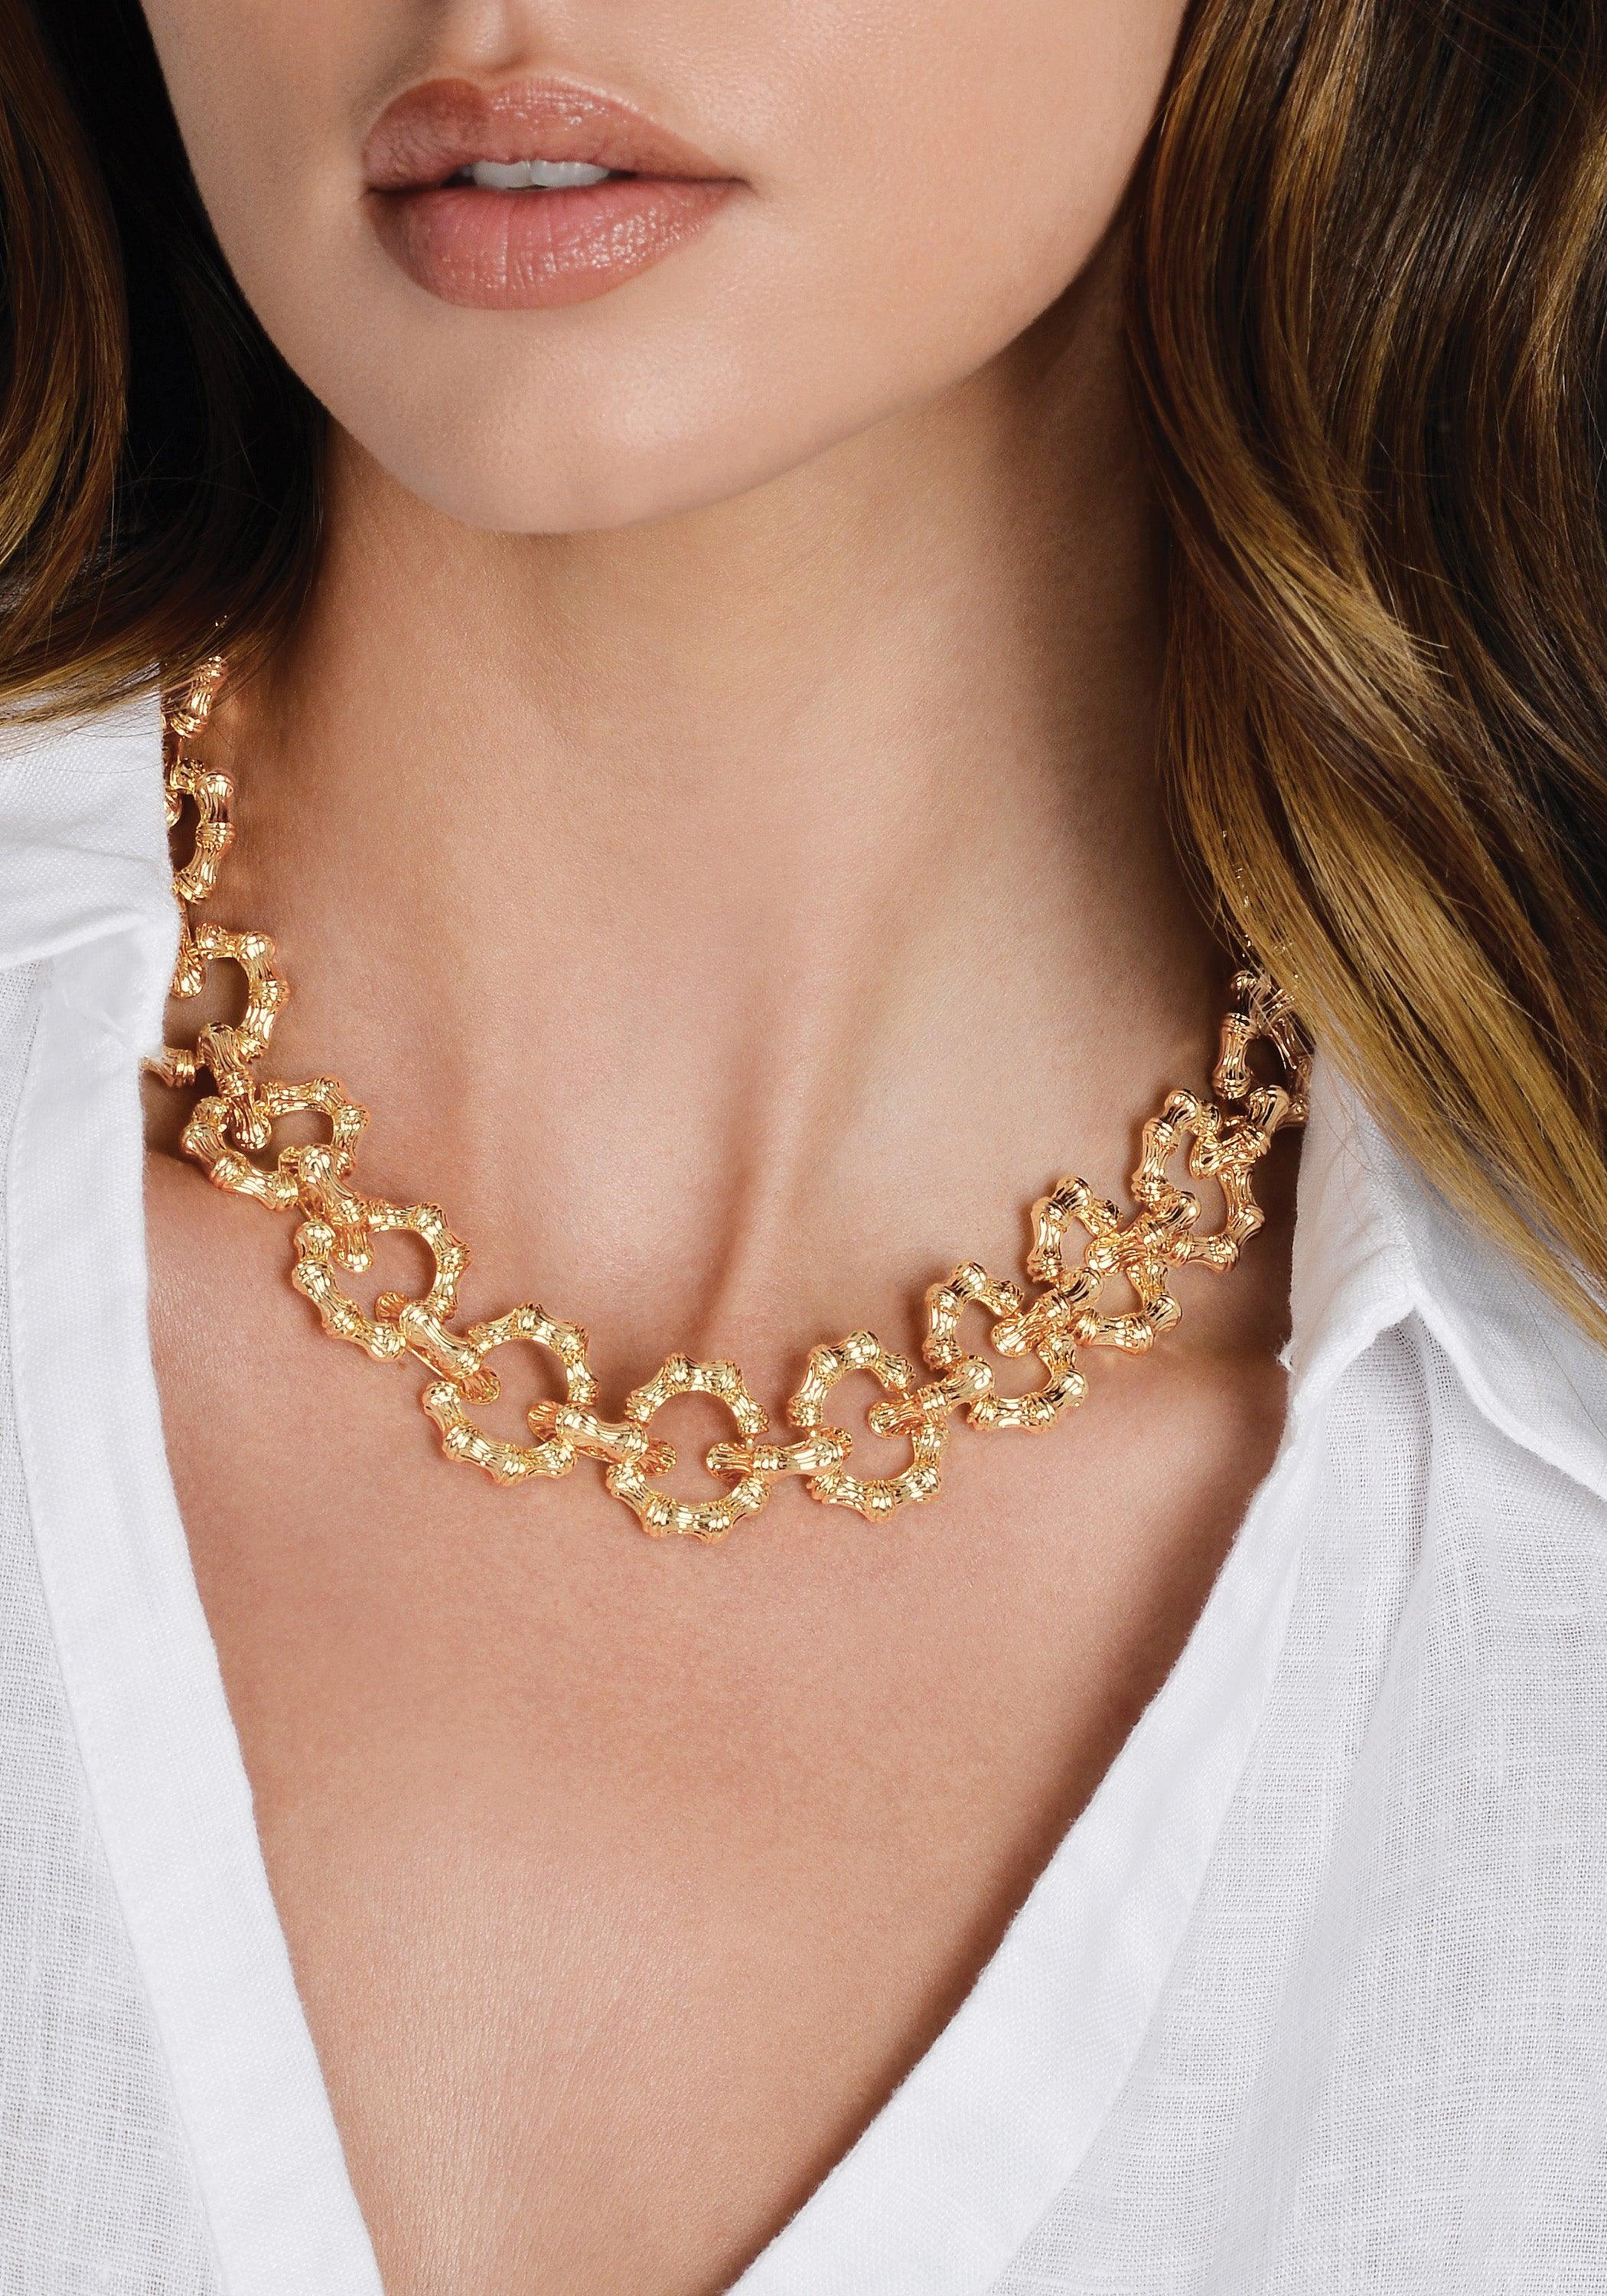 Anabel Aram Bamboo Chain Necklace